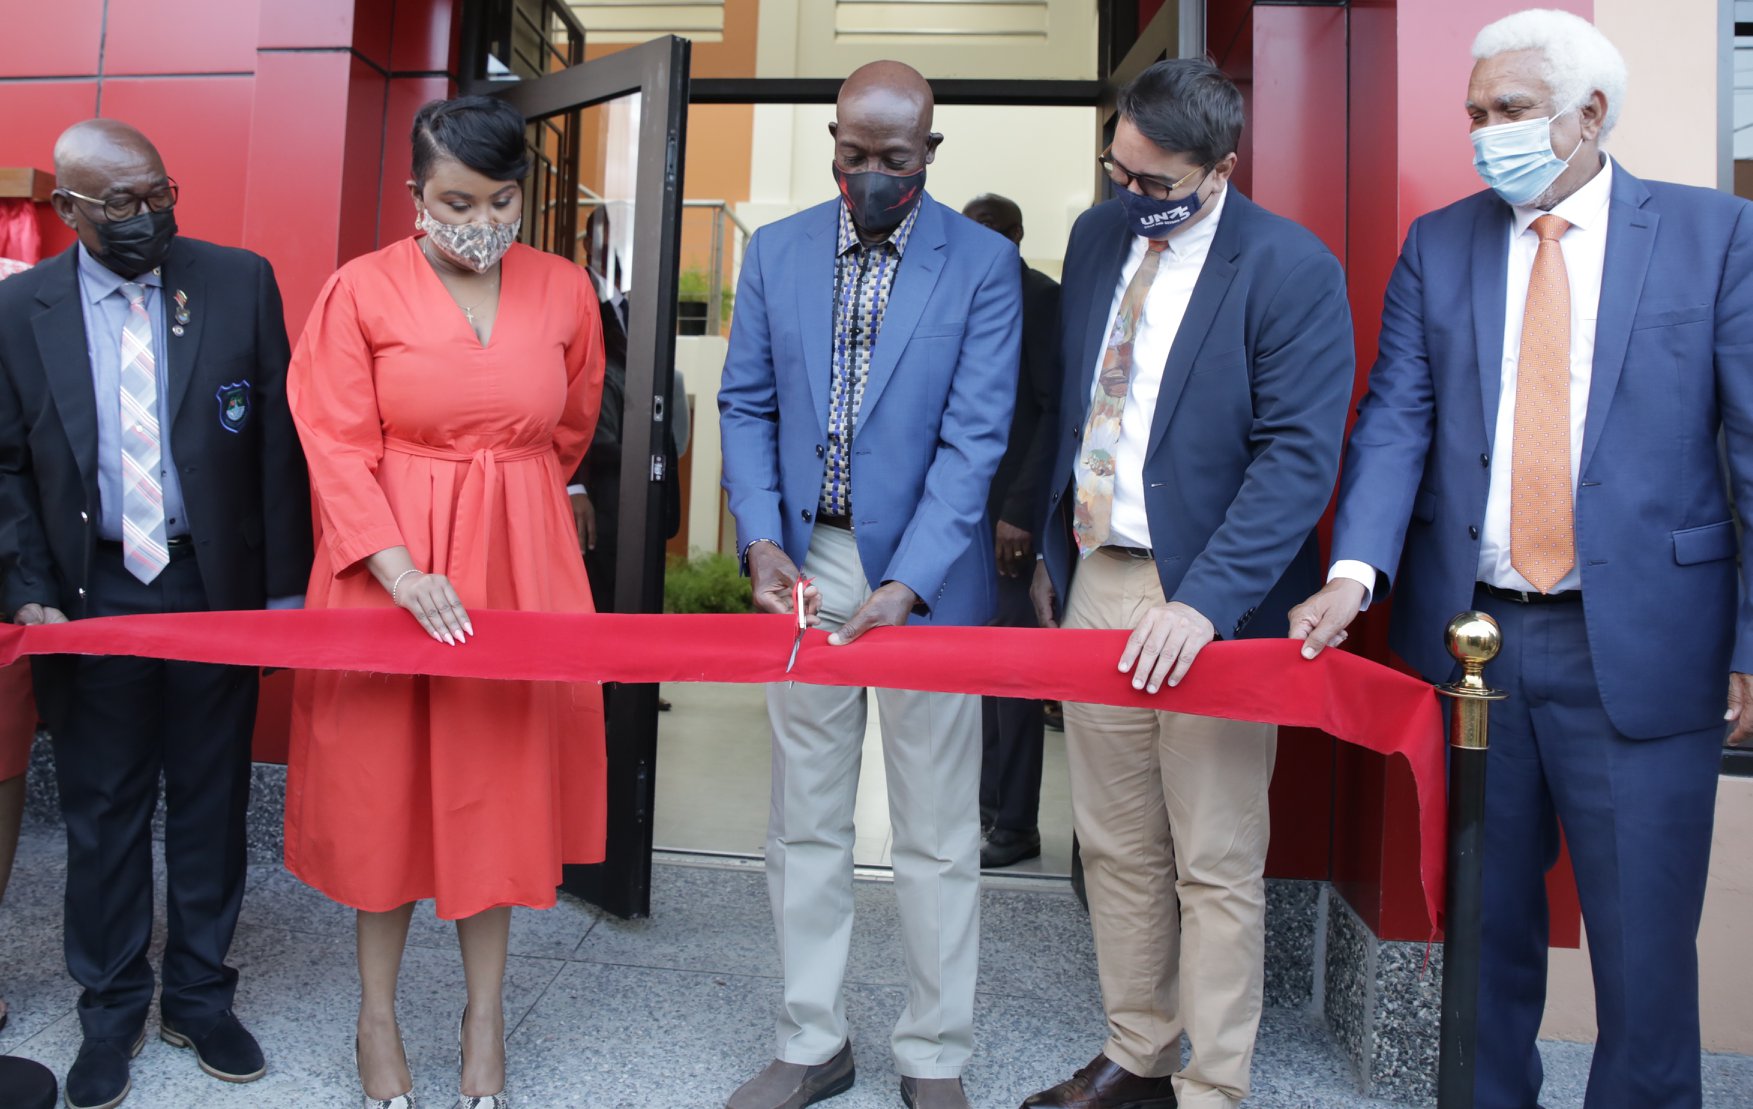 PM opens new community centre for Diego Martin South